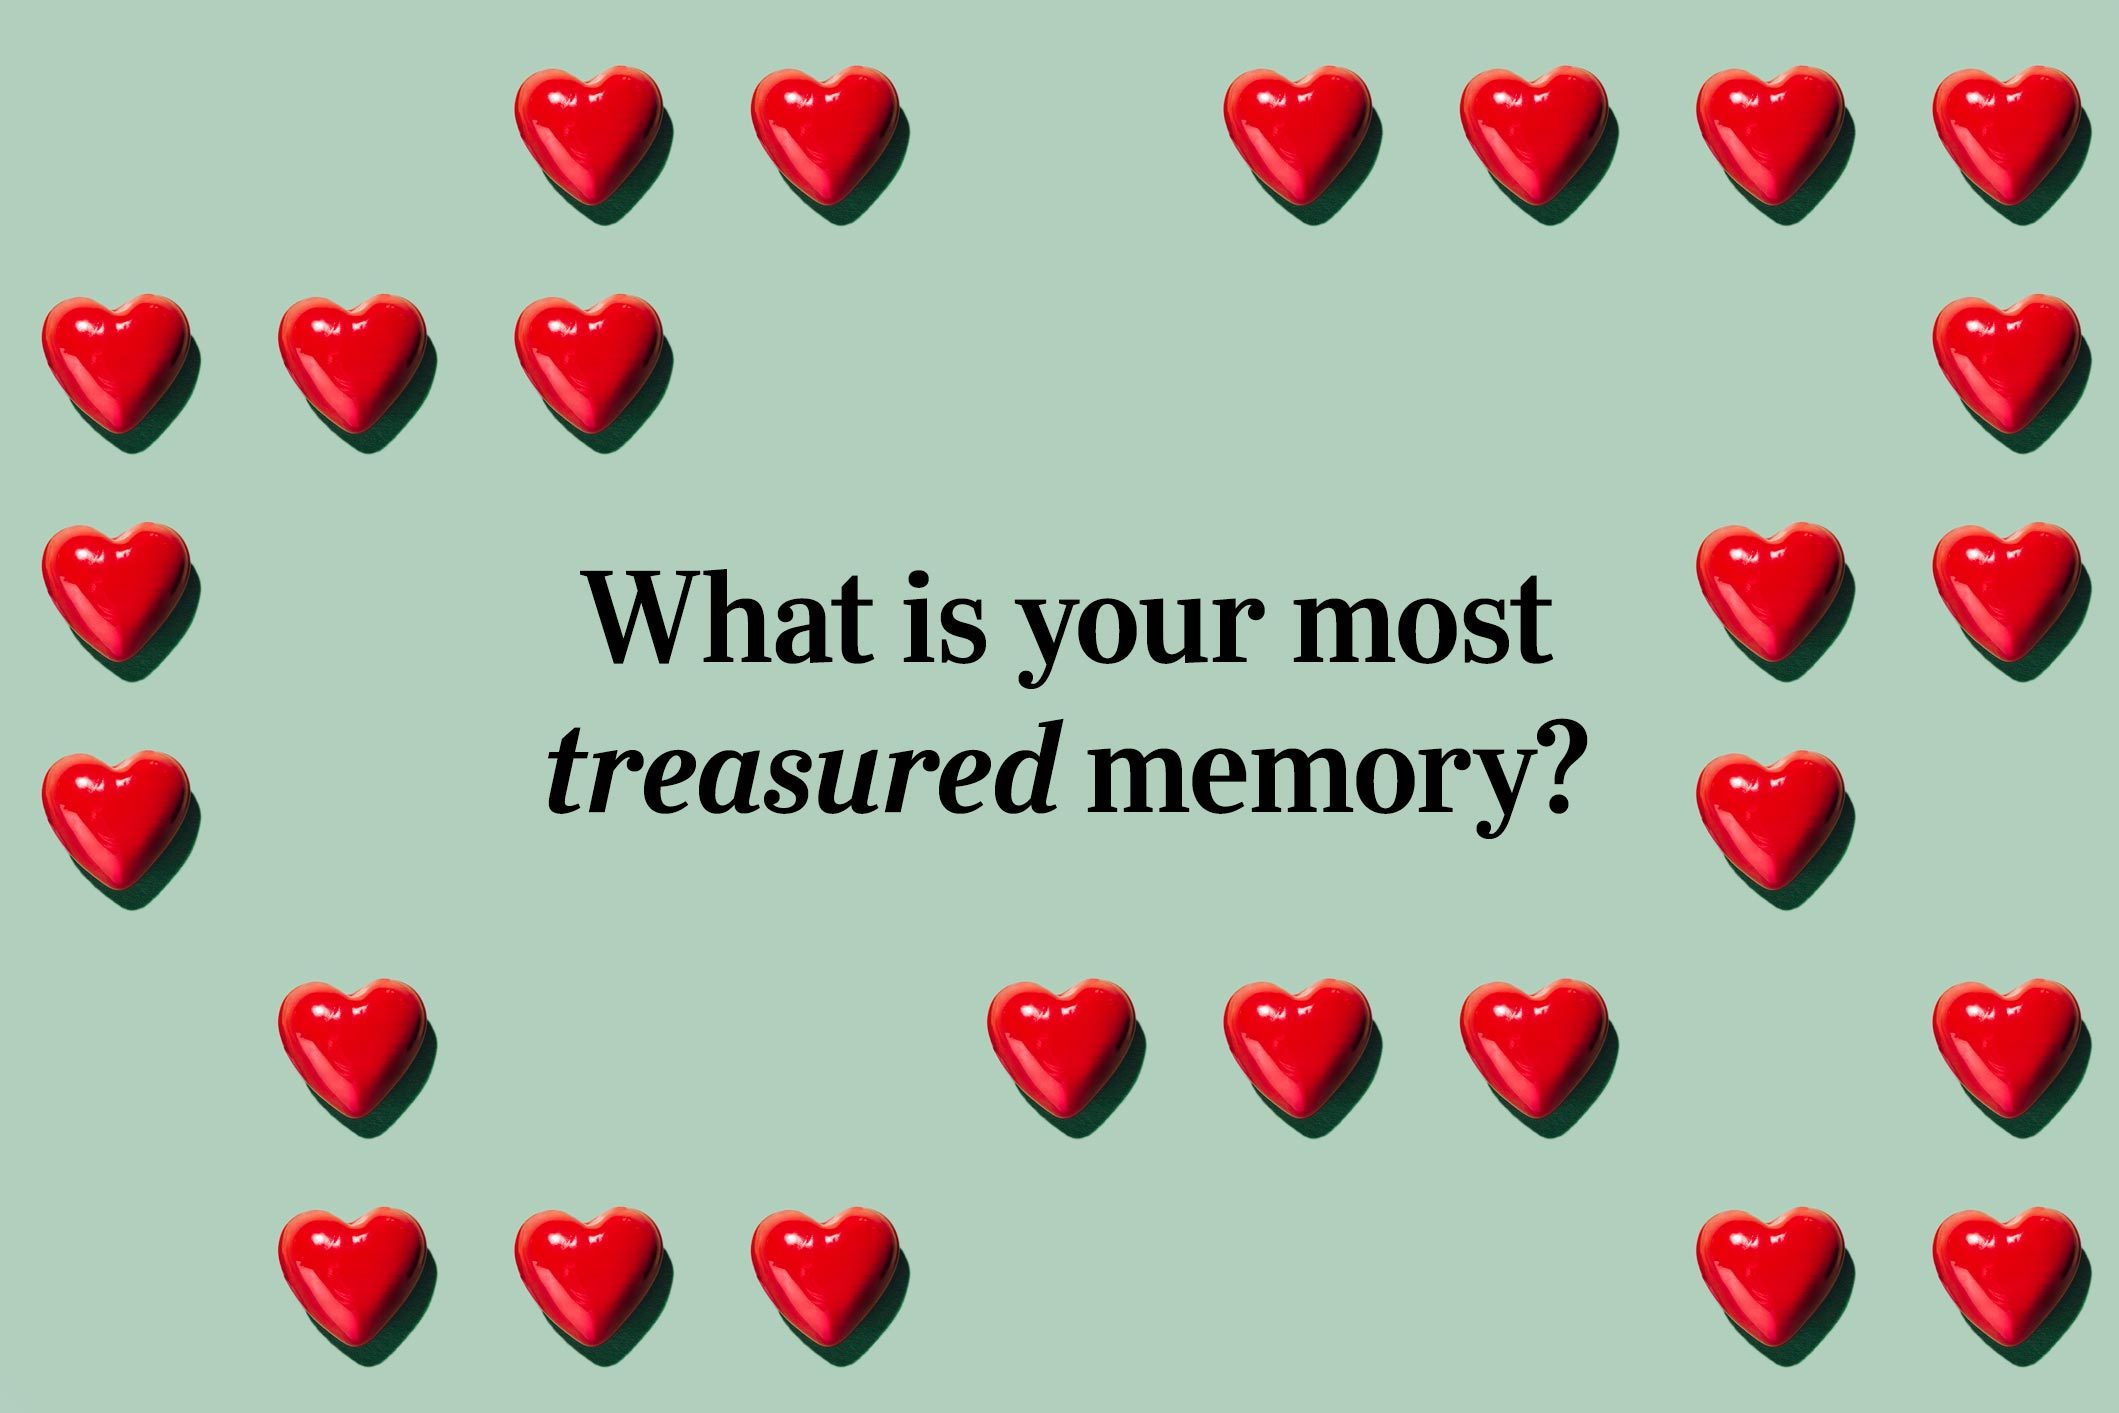 <p>What is your most treasured memory?</p>